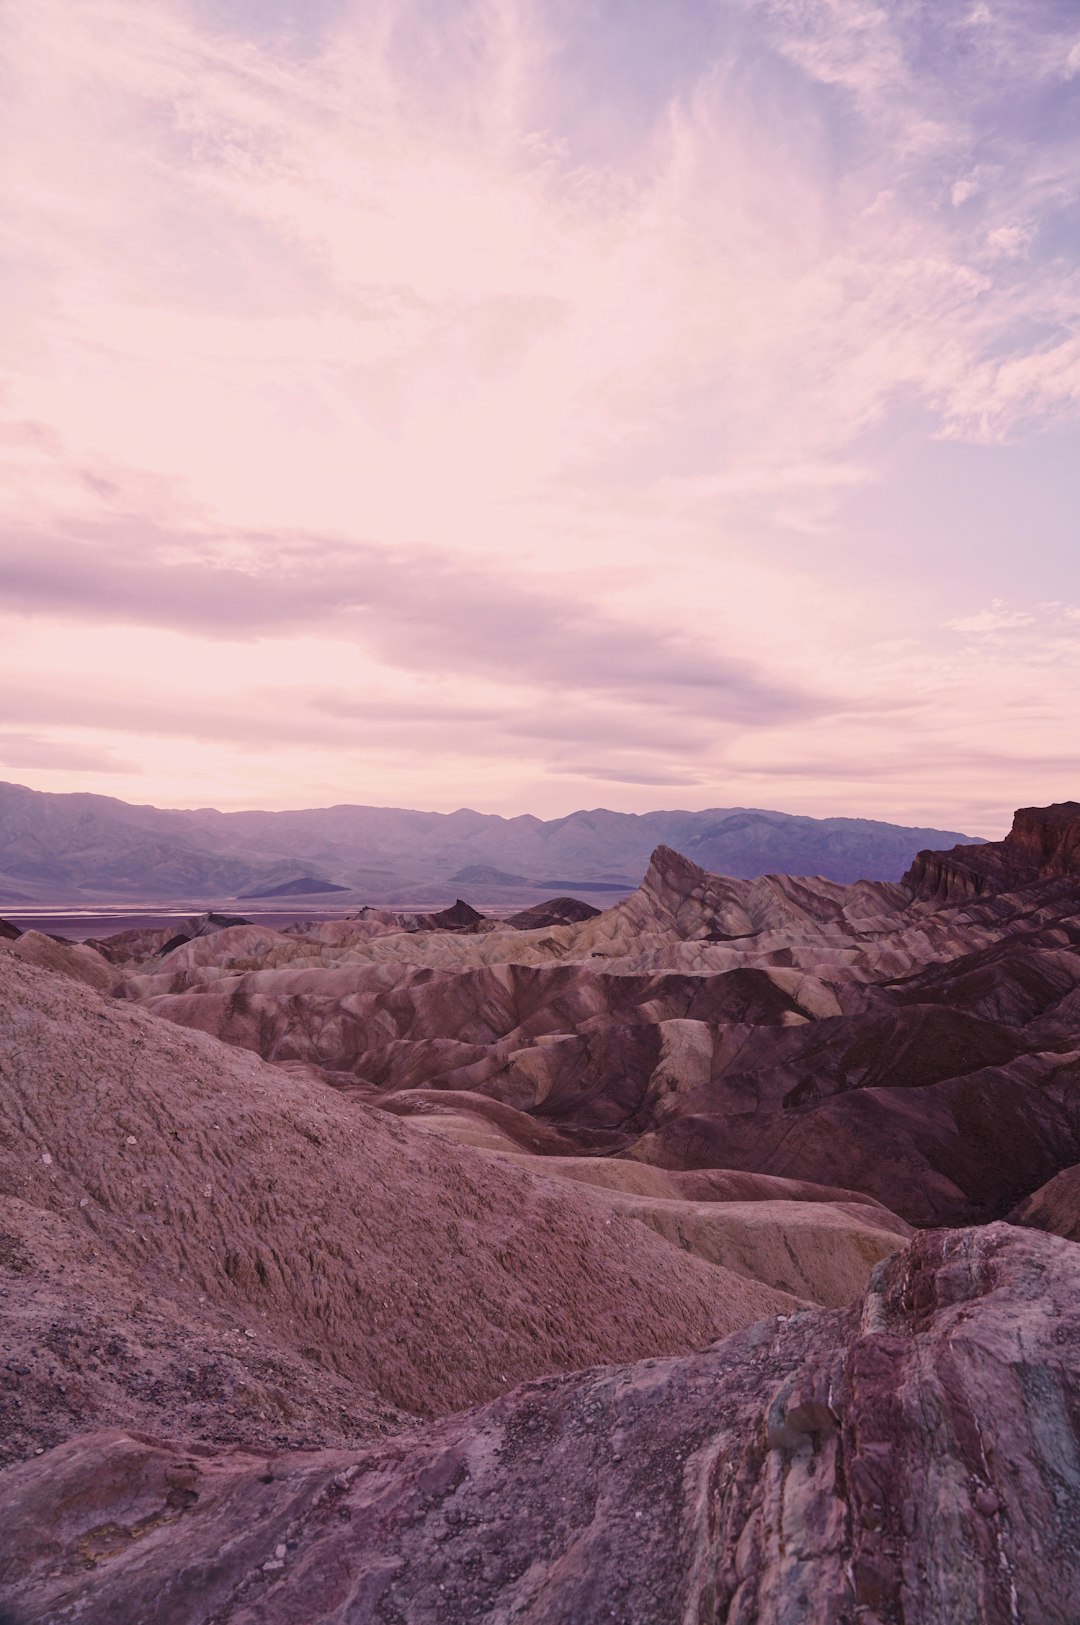 travelers stories about Badlands in Death Valley National Park, United States